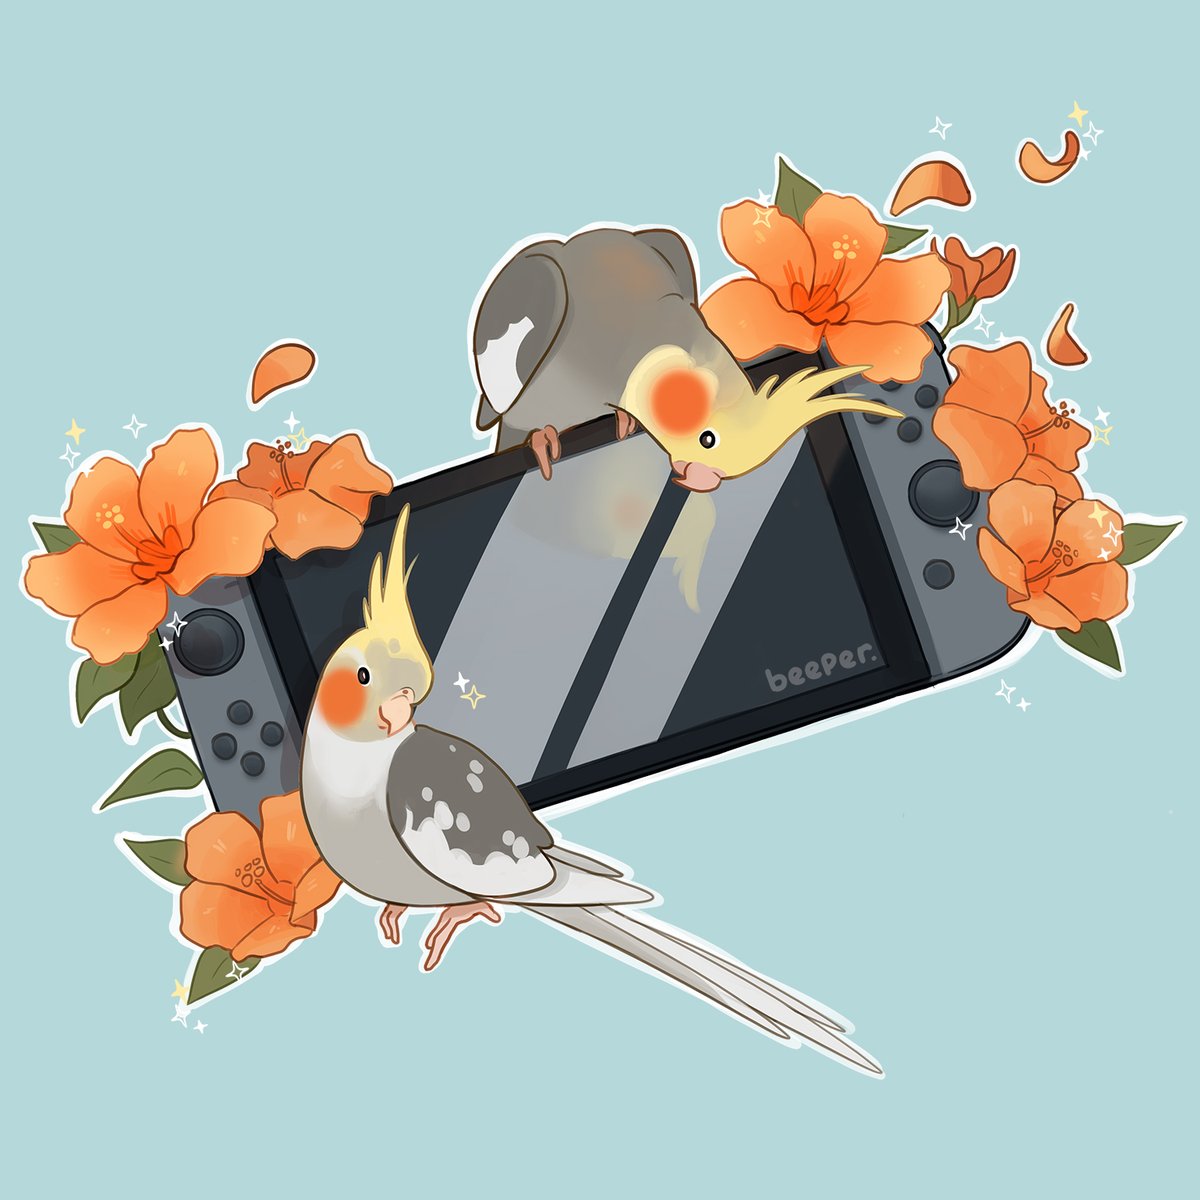 「look at all the birdies & switch commiss」|beeper.artのイラスト